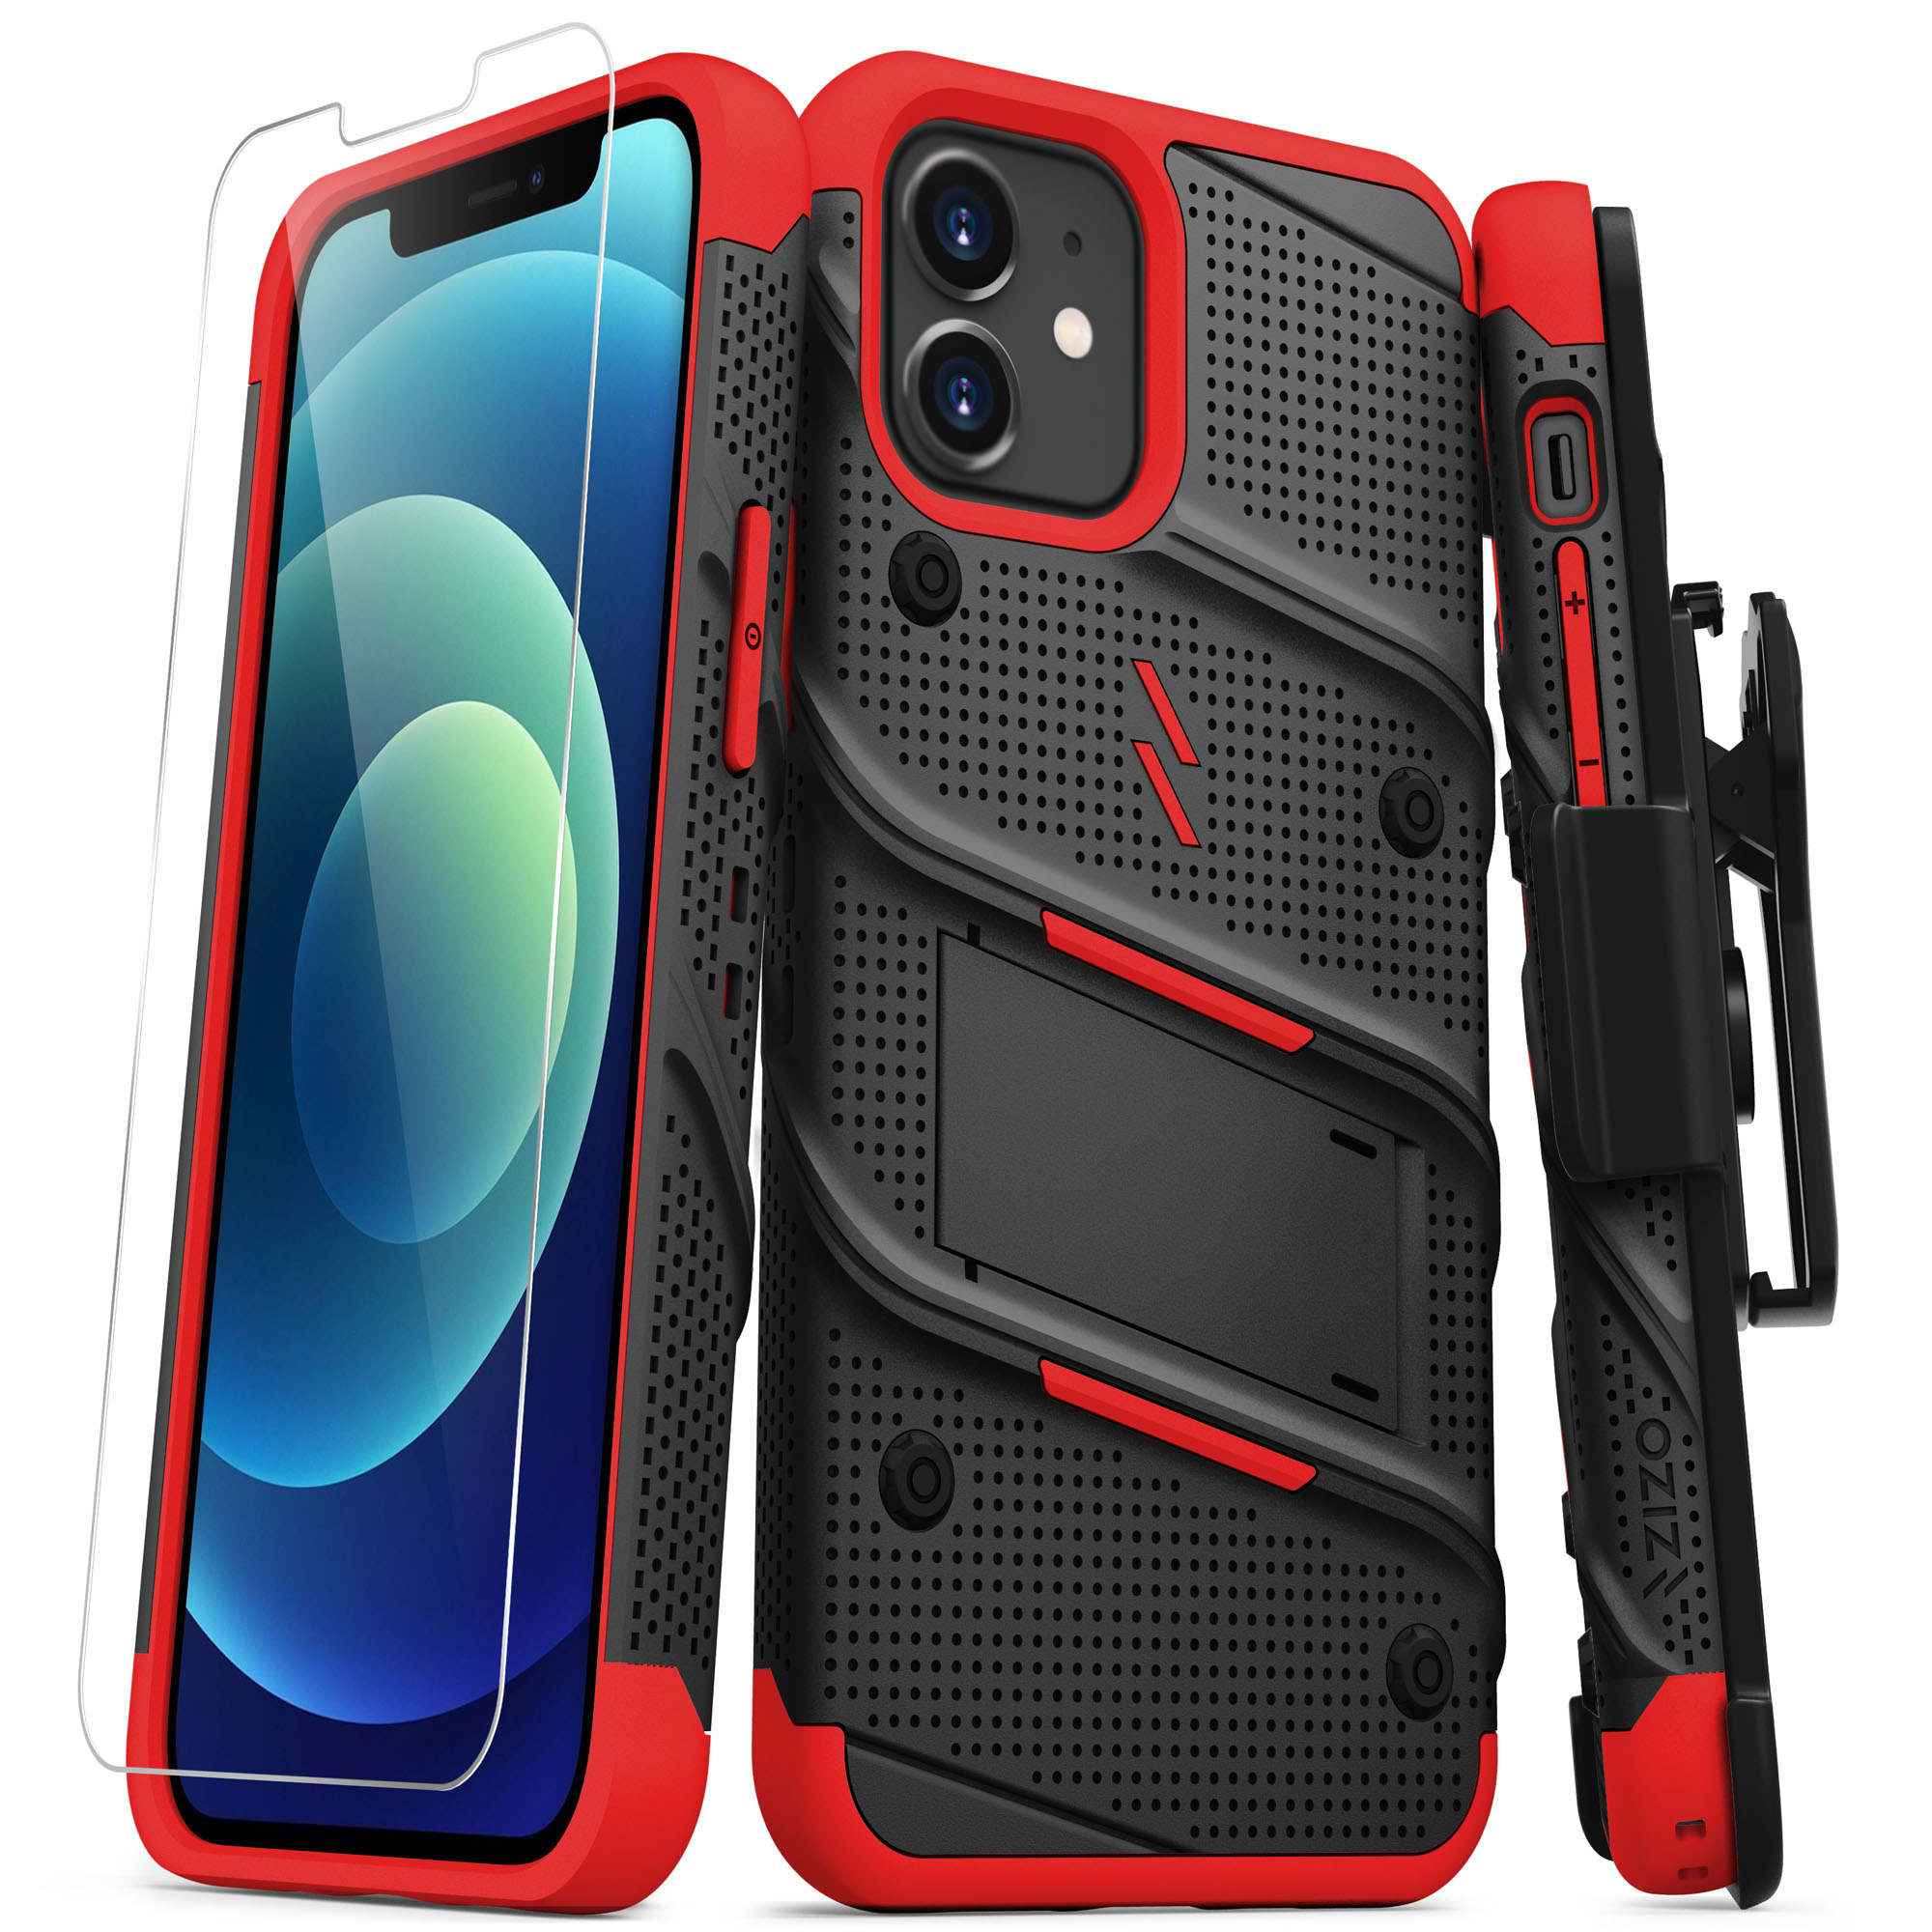 ZIZO BOLT Cover Case with Tempered Glass Screen Protector Black & Red